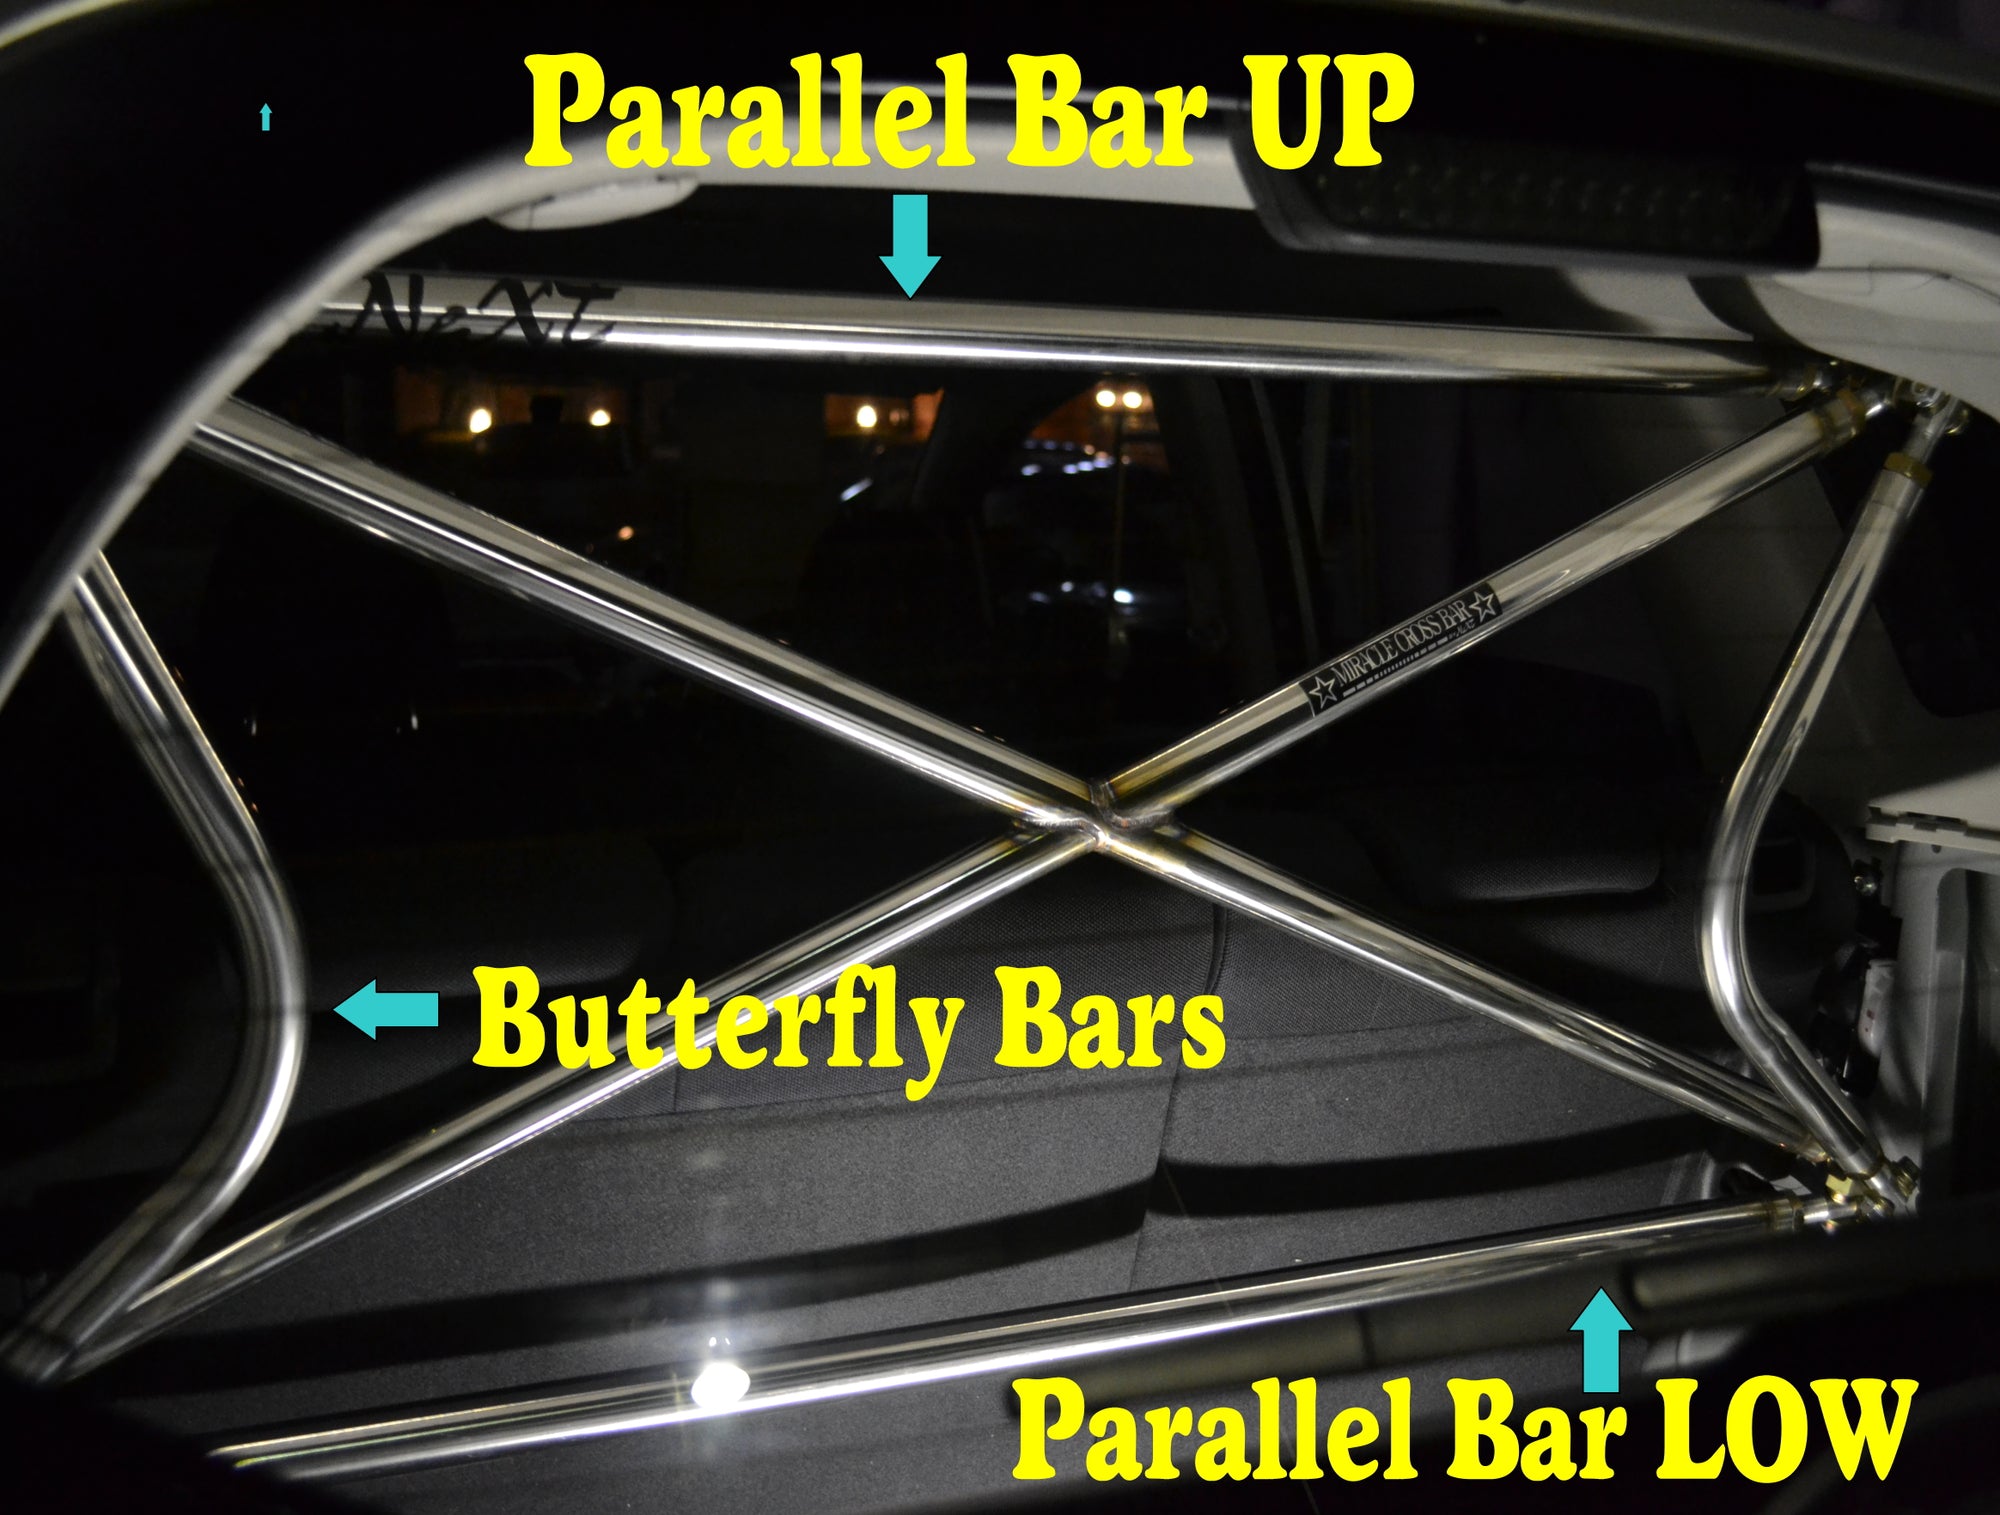 NEXT MIRACLE CROSS BAR BUTTERFLY BAR RIGHT & LEFT STAINLESS 32 FOR SUBARU IMPREZA GC8 R B NEXT-01622